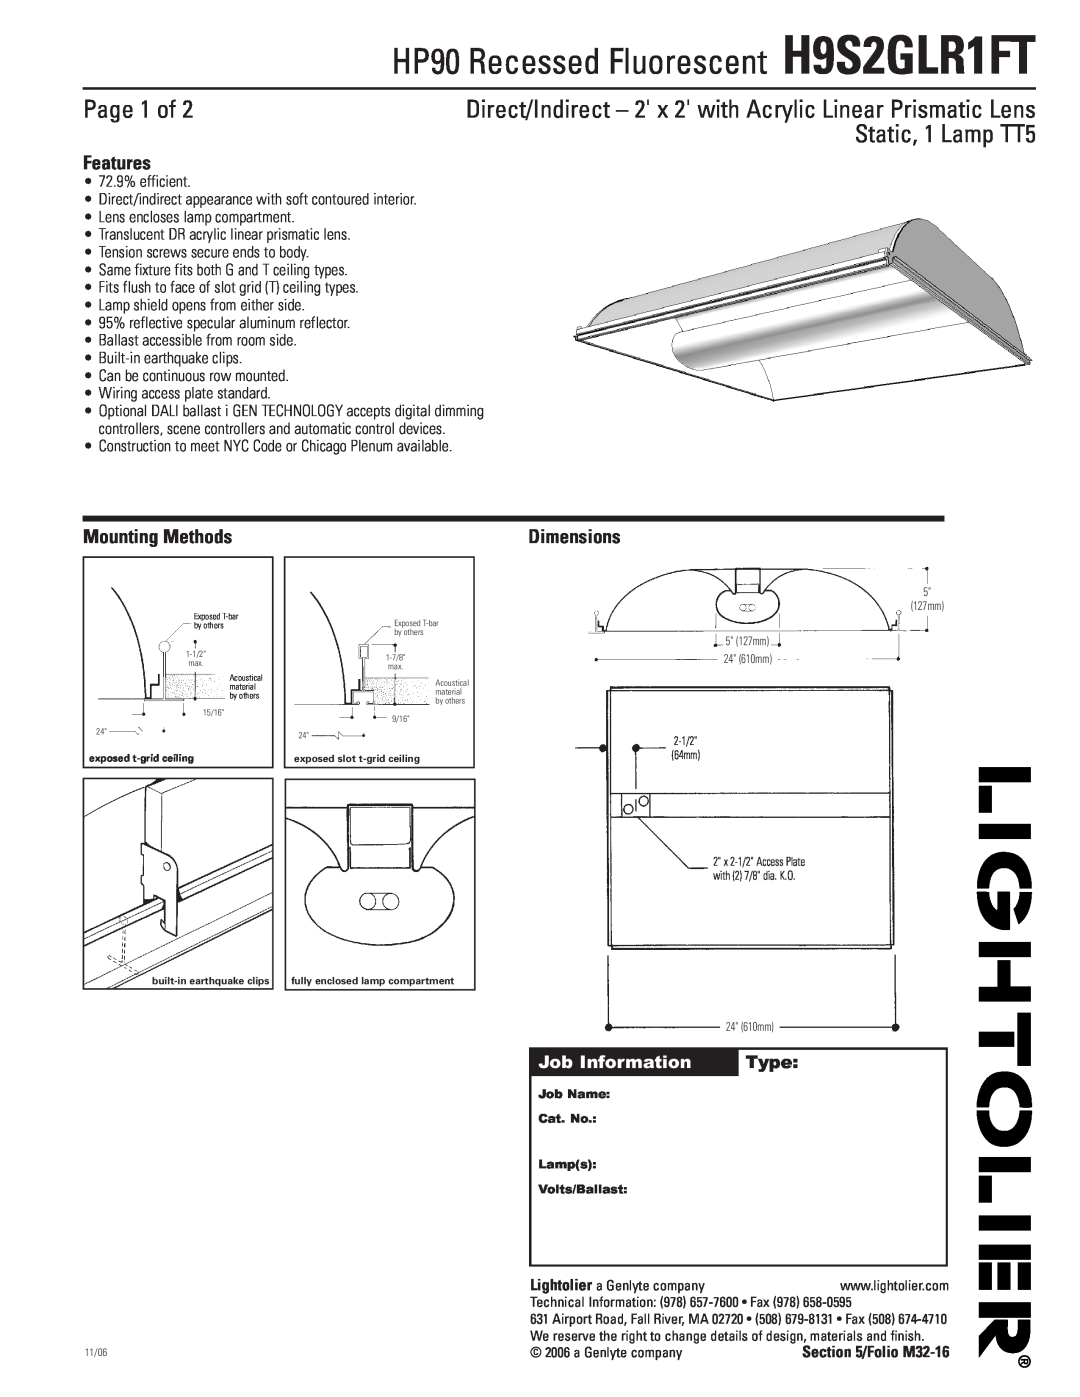 Lightolier H9S2GLR1FT dimensions Page 1 of, Static, 1 Lamp TT5, Features, Mounting Methods, Dimensions, Job Information 